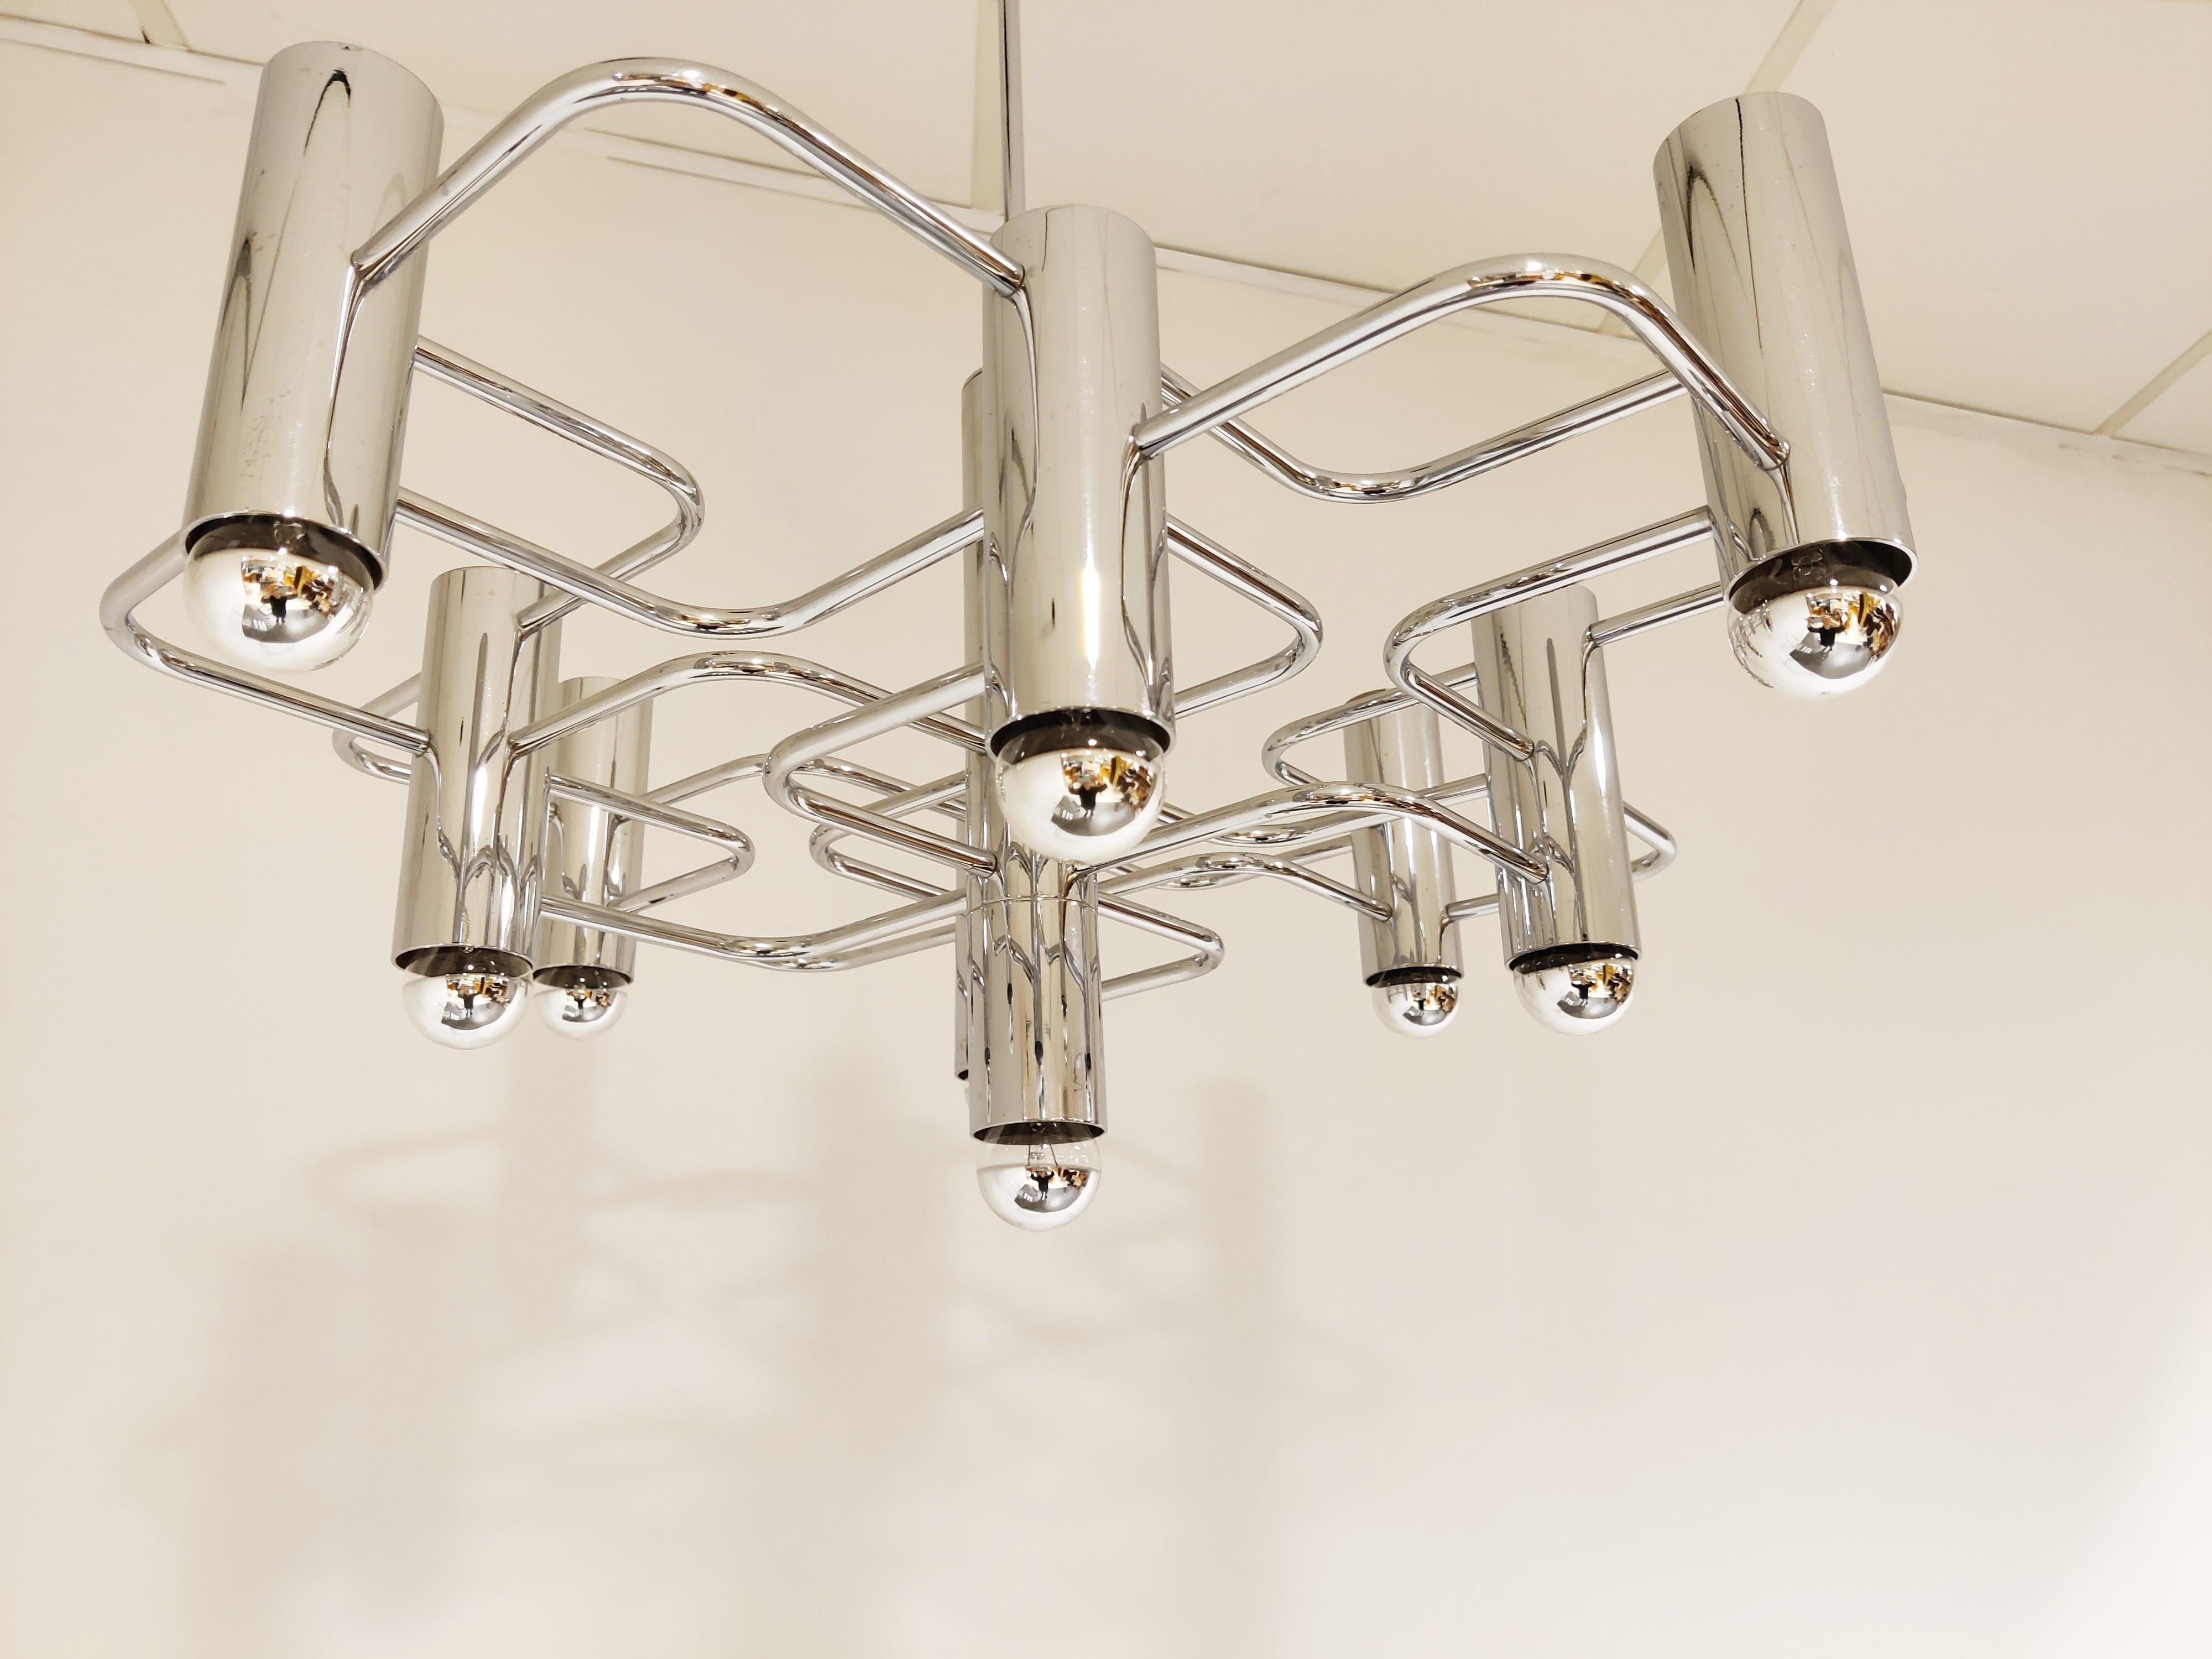 Vintage chrome 9 lightpoint chandelier designed by Gaetano Sciolari for Boulanger.

The chandelier is in good condition and fits in perfectly with moderns day interiors.

1970s - Italy 

Tested and ready for use. The chandelier works with